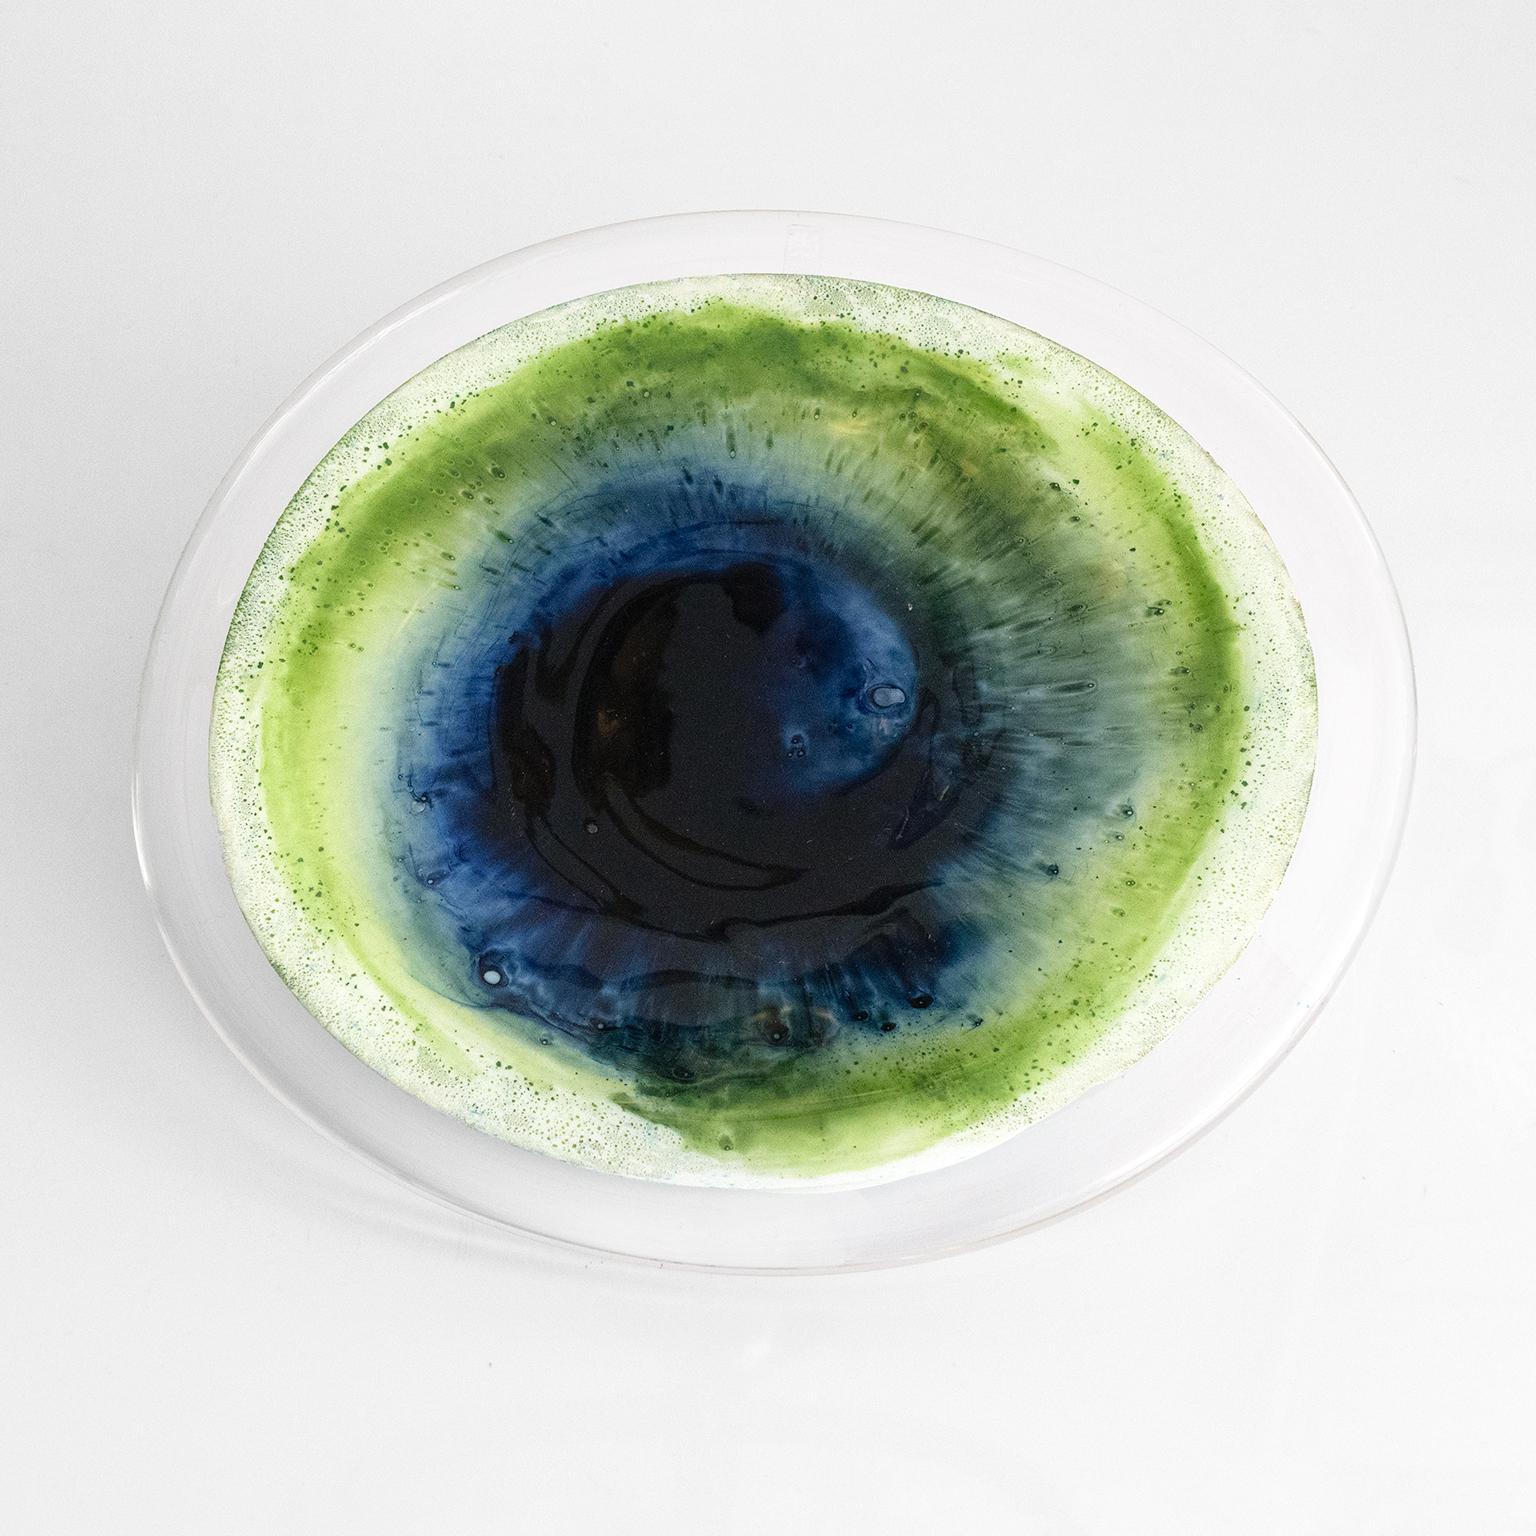 A bold, vibrant glass “Koralli” dish designed by Tamara Aladin for Riihimäen Lasi Oy. The deep blue and green colored glass swirl in a clear glass body resting on an opaque white base. Made in Riihimäki, Finland 1970. 

Dimensions: 14” x 16”,